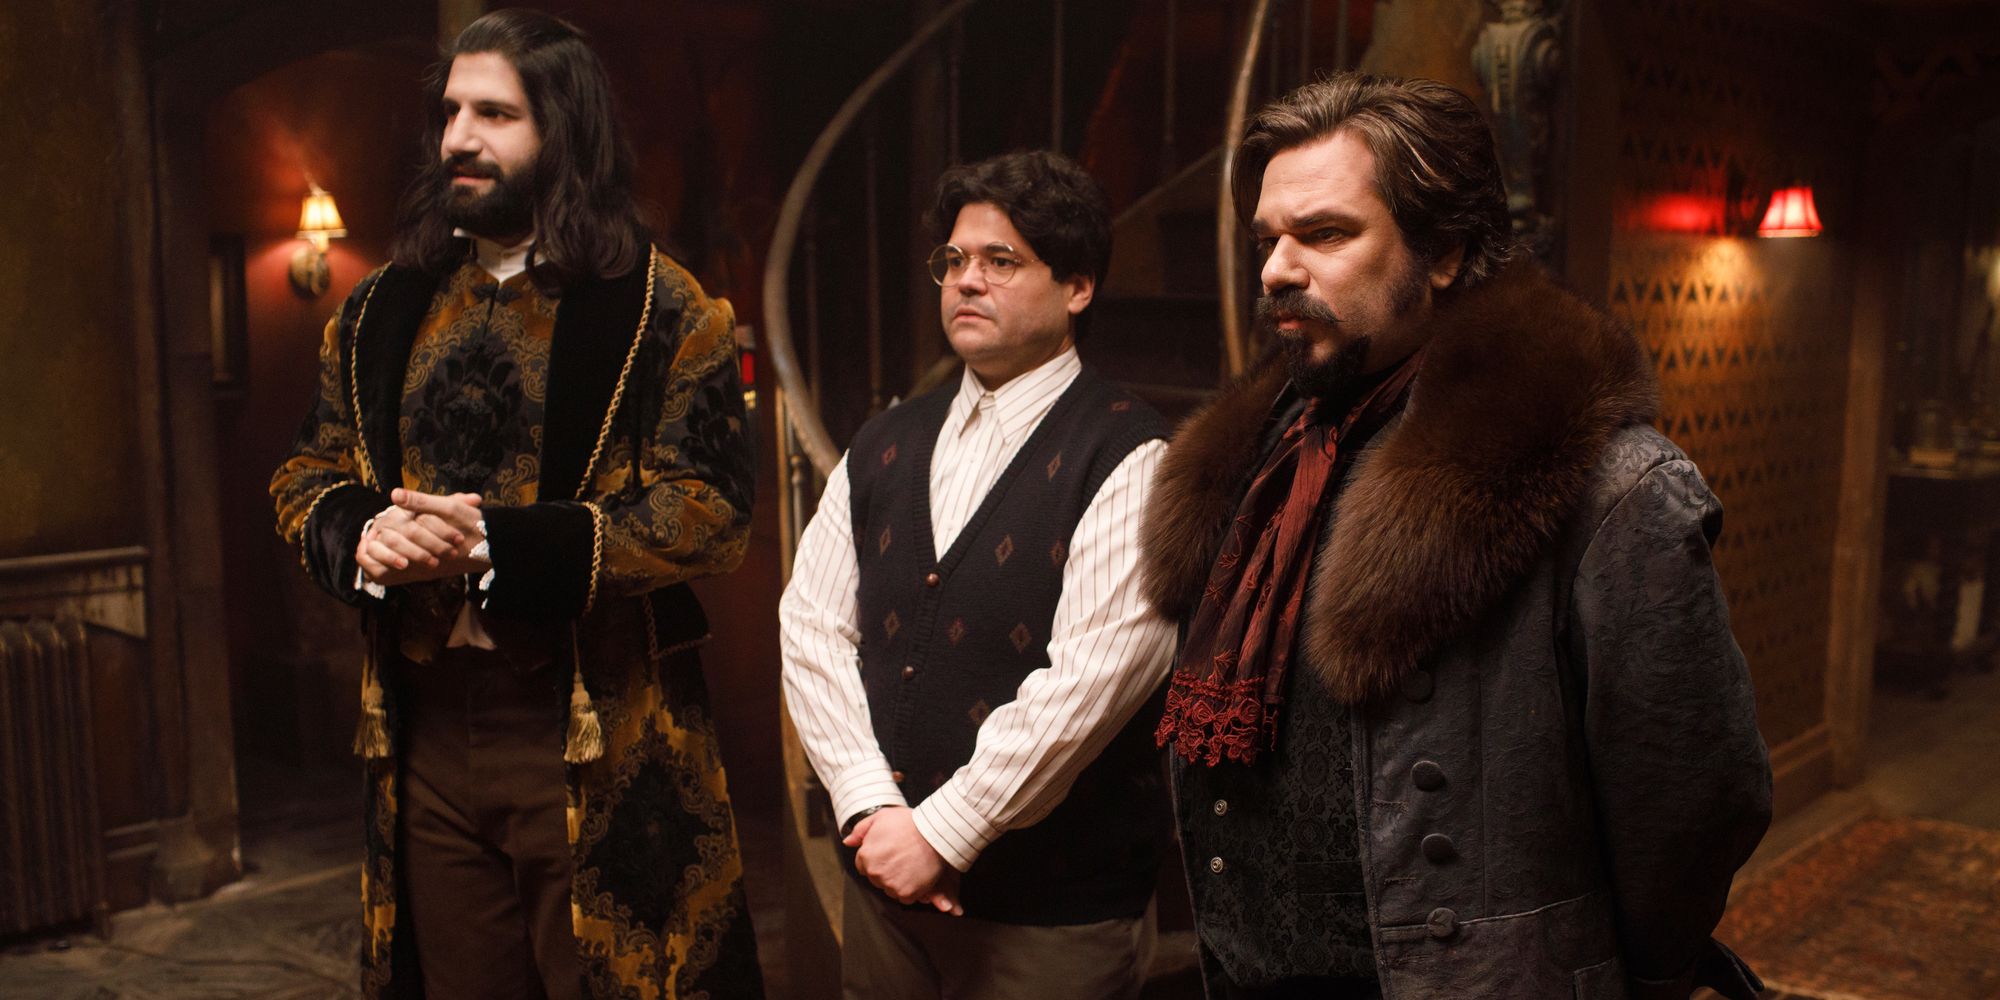 Nandor, Guillermo and Laszlo standing together in What We Do in the Shadows